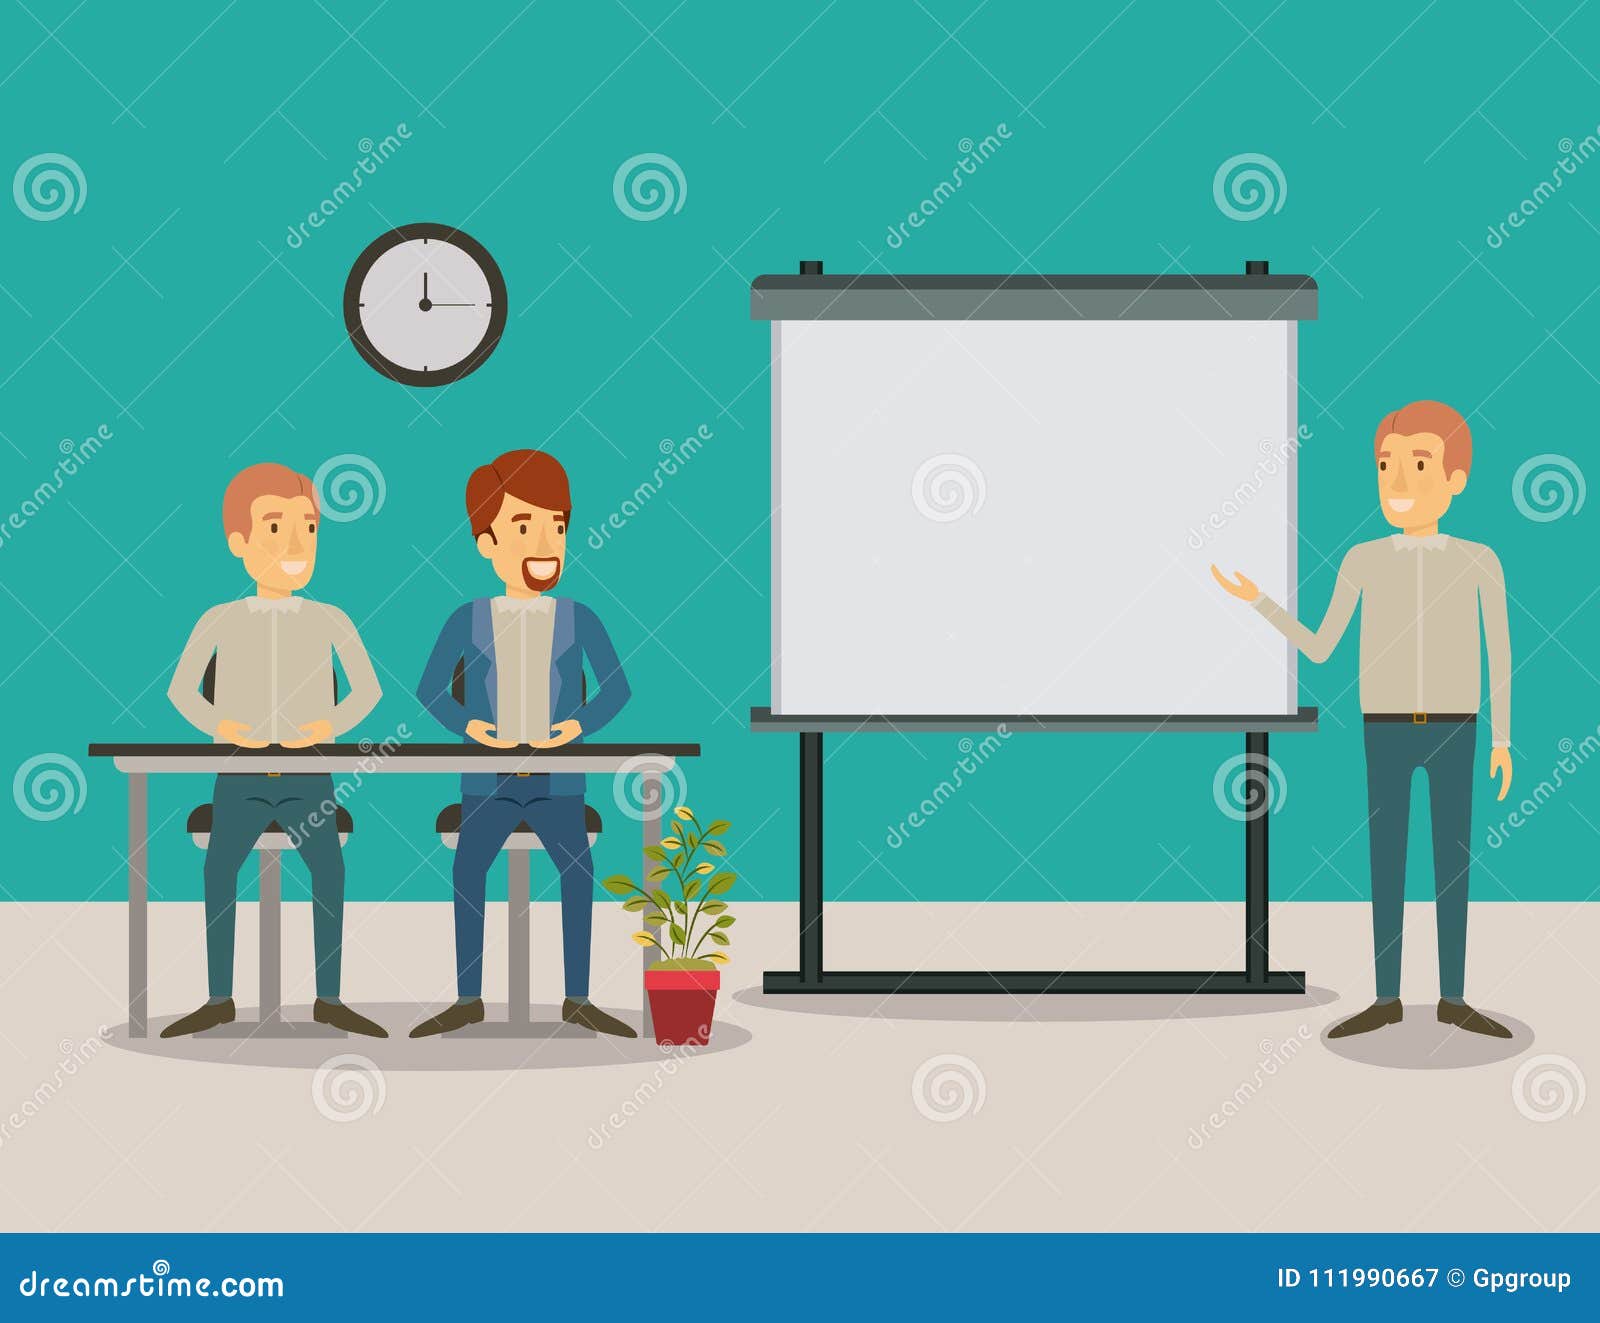 color background couple of man sitting in a desk for executive in presentacion business people